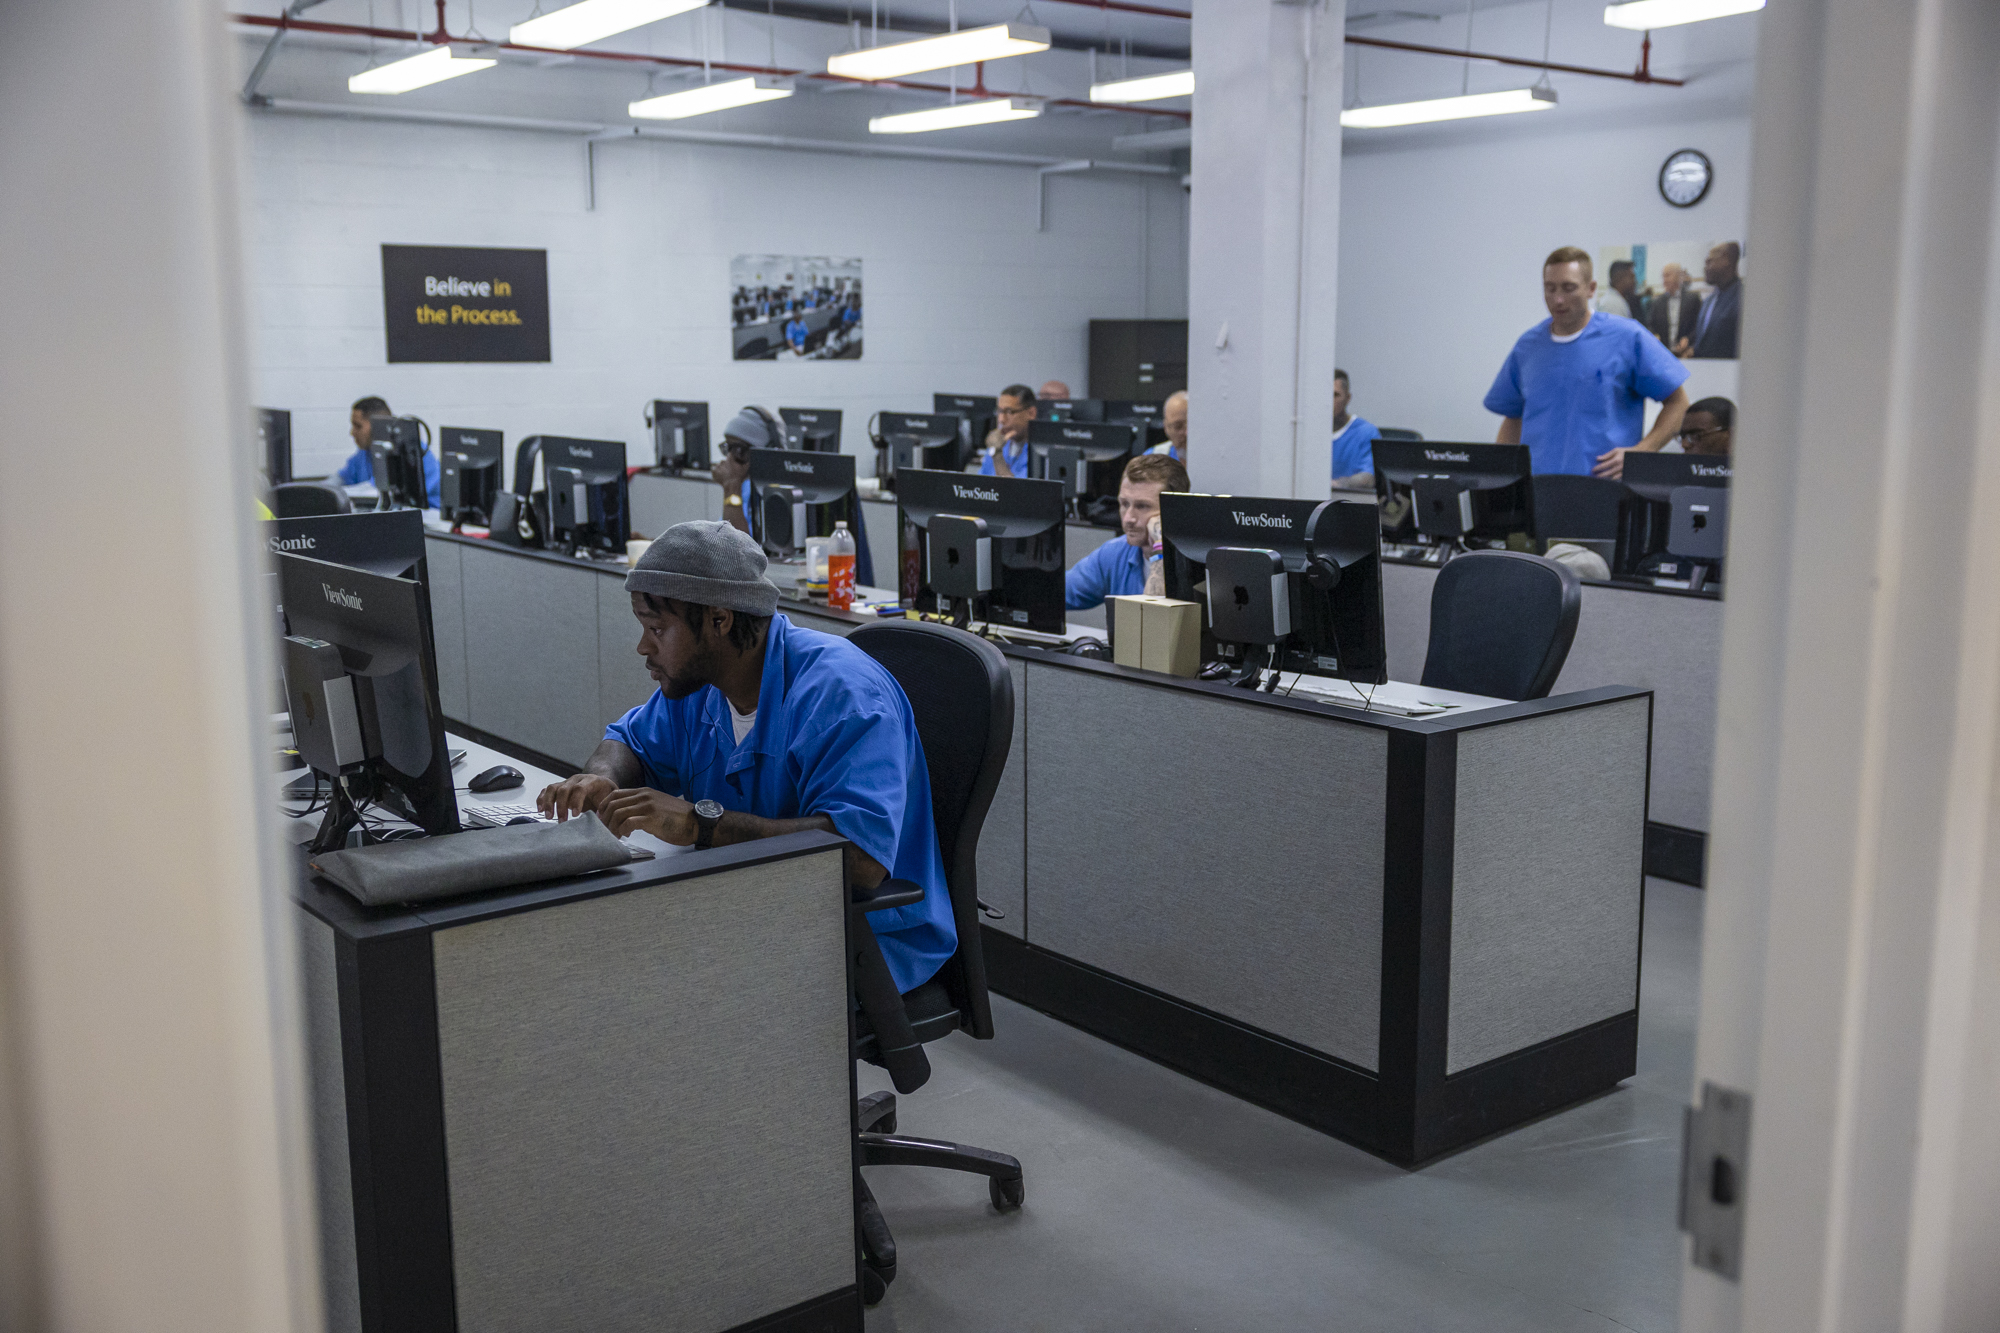 A room full of men sitting at computers and working in blue uniforms.